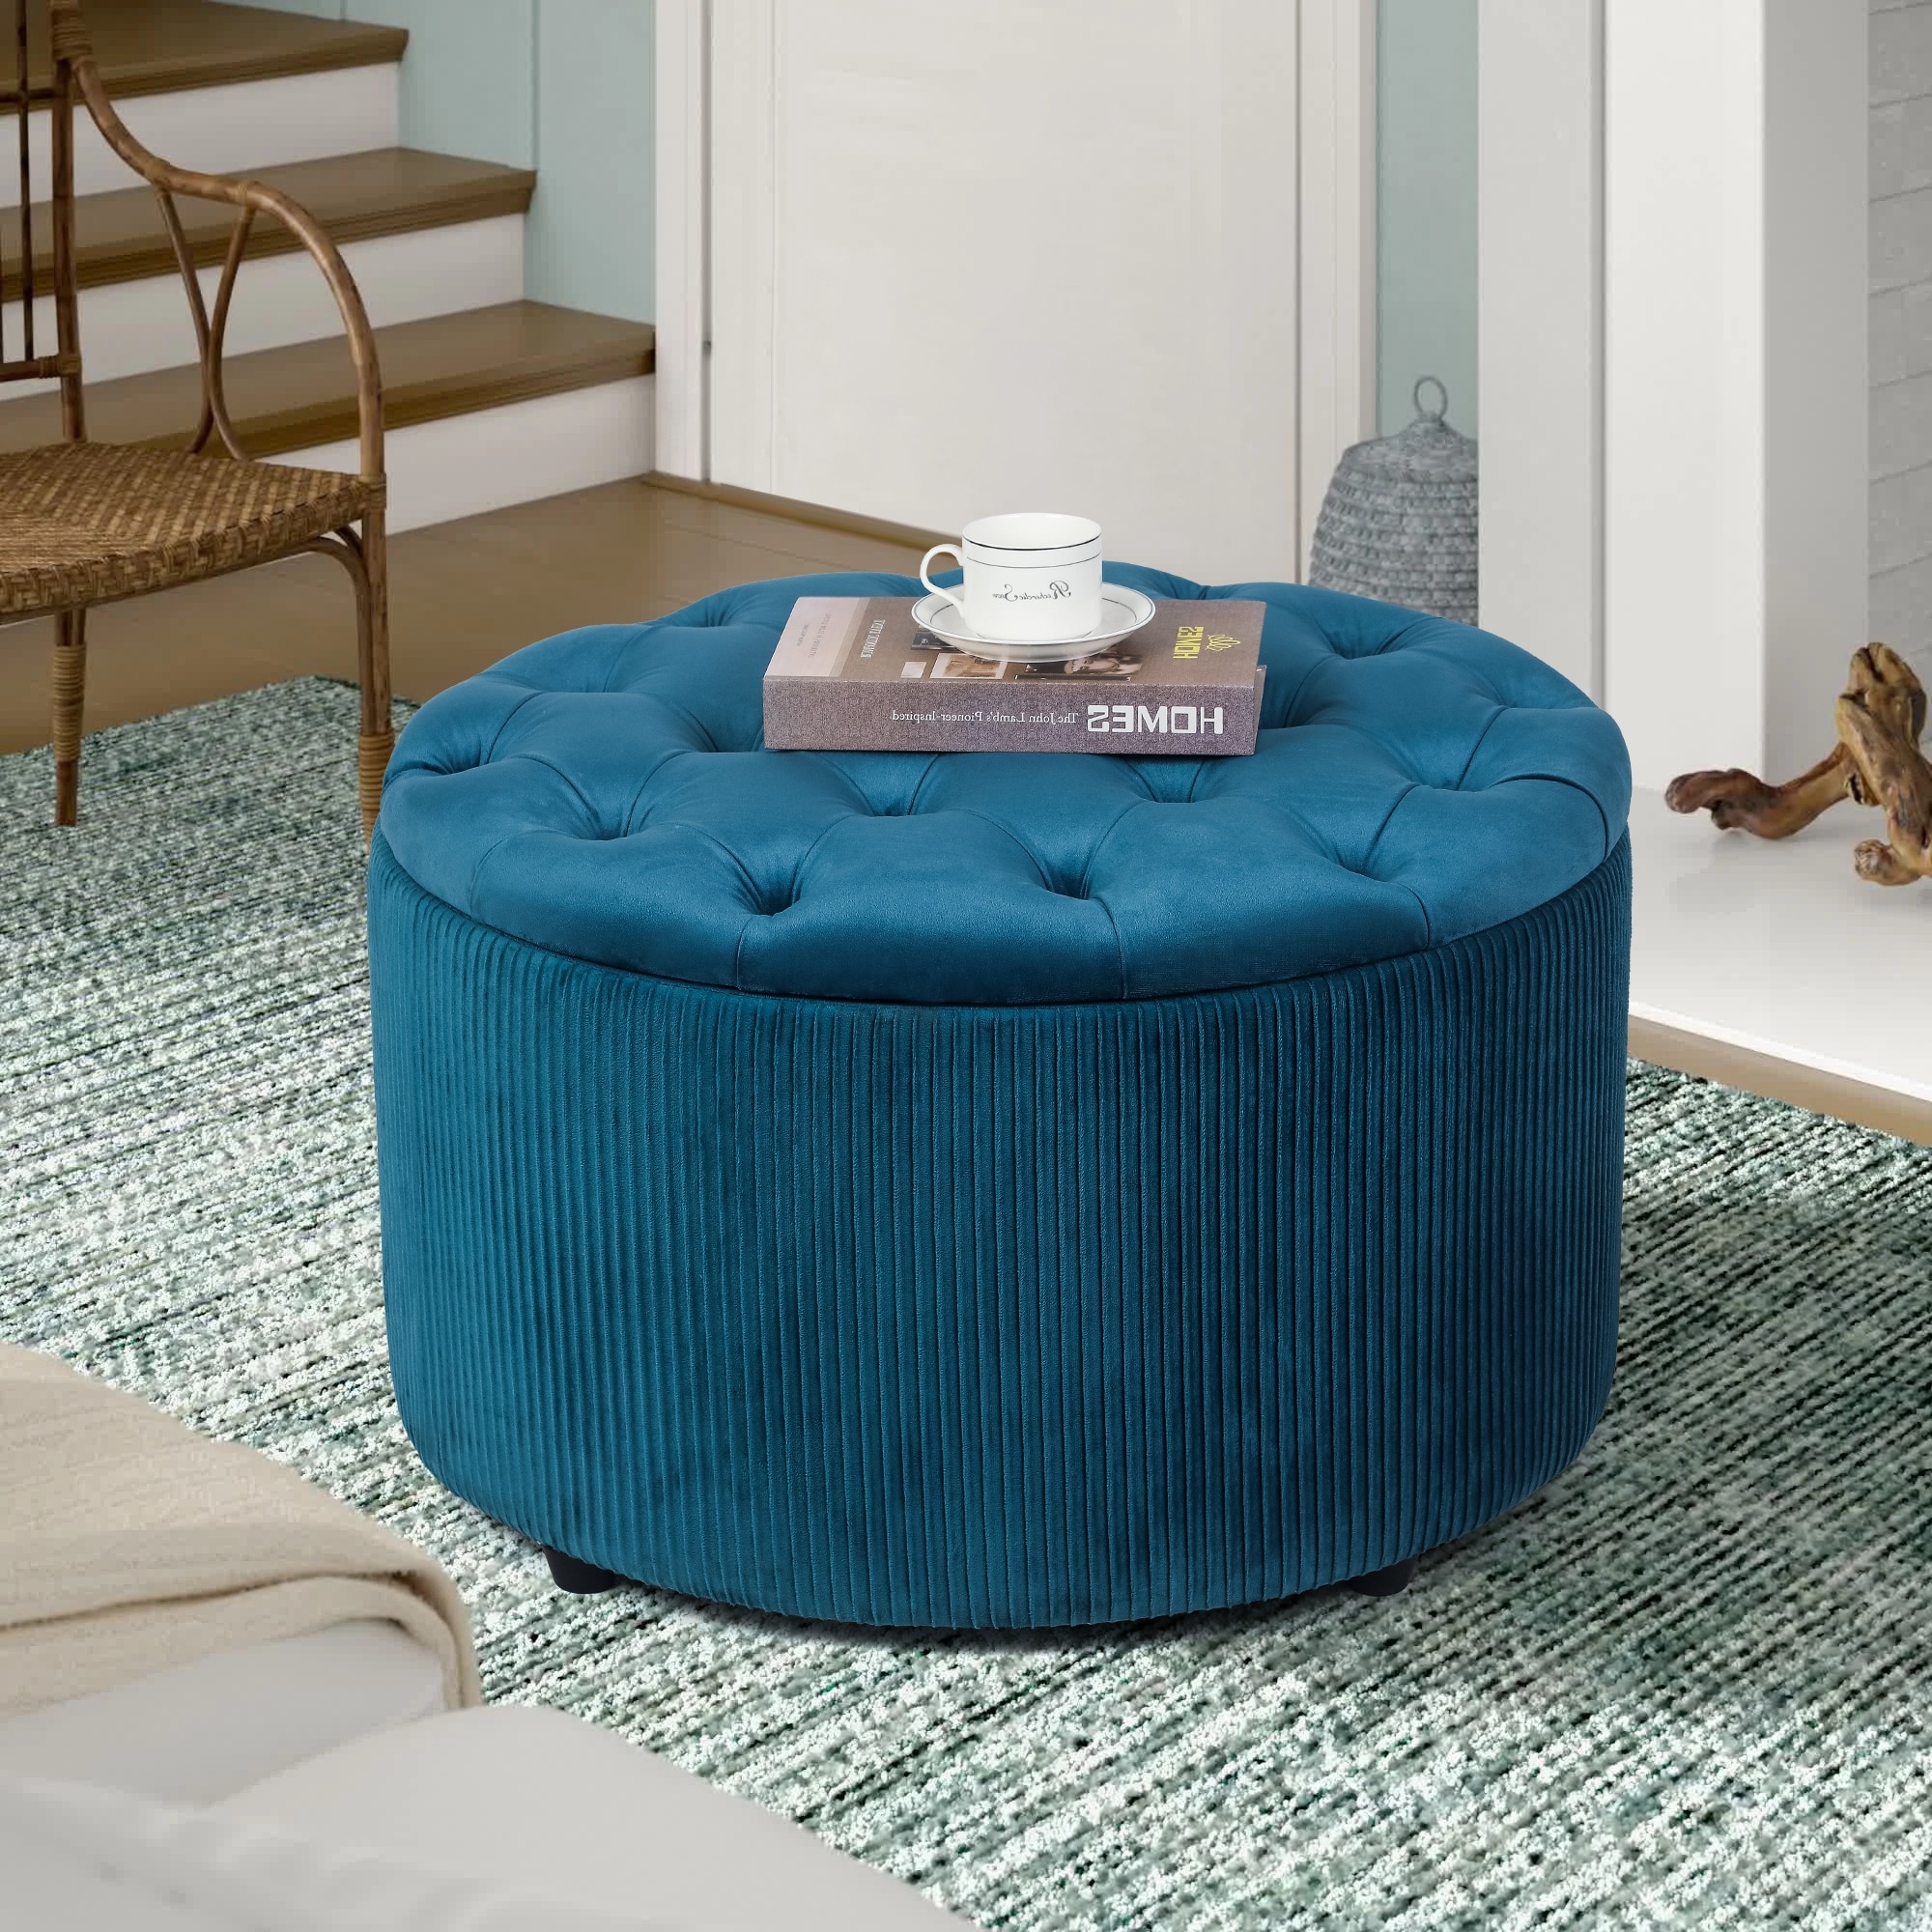 https://ak1.ostkcdn.com/images/products/is/images/direct/63db9f15385fcaec8bb7fe998becd392018e7e65/Adeco-Round-Storage-Ottoman-Button-Tufted-Footrest-Stool-Bench.jpg